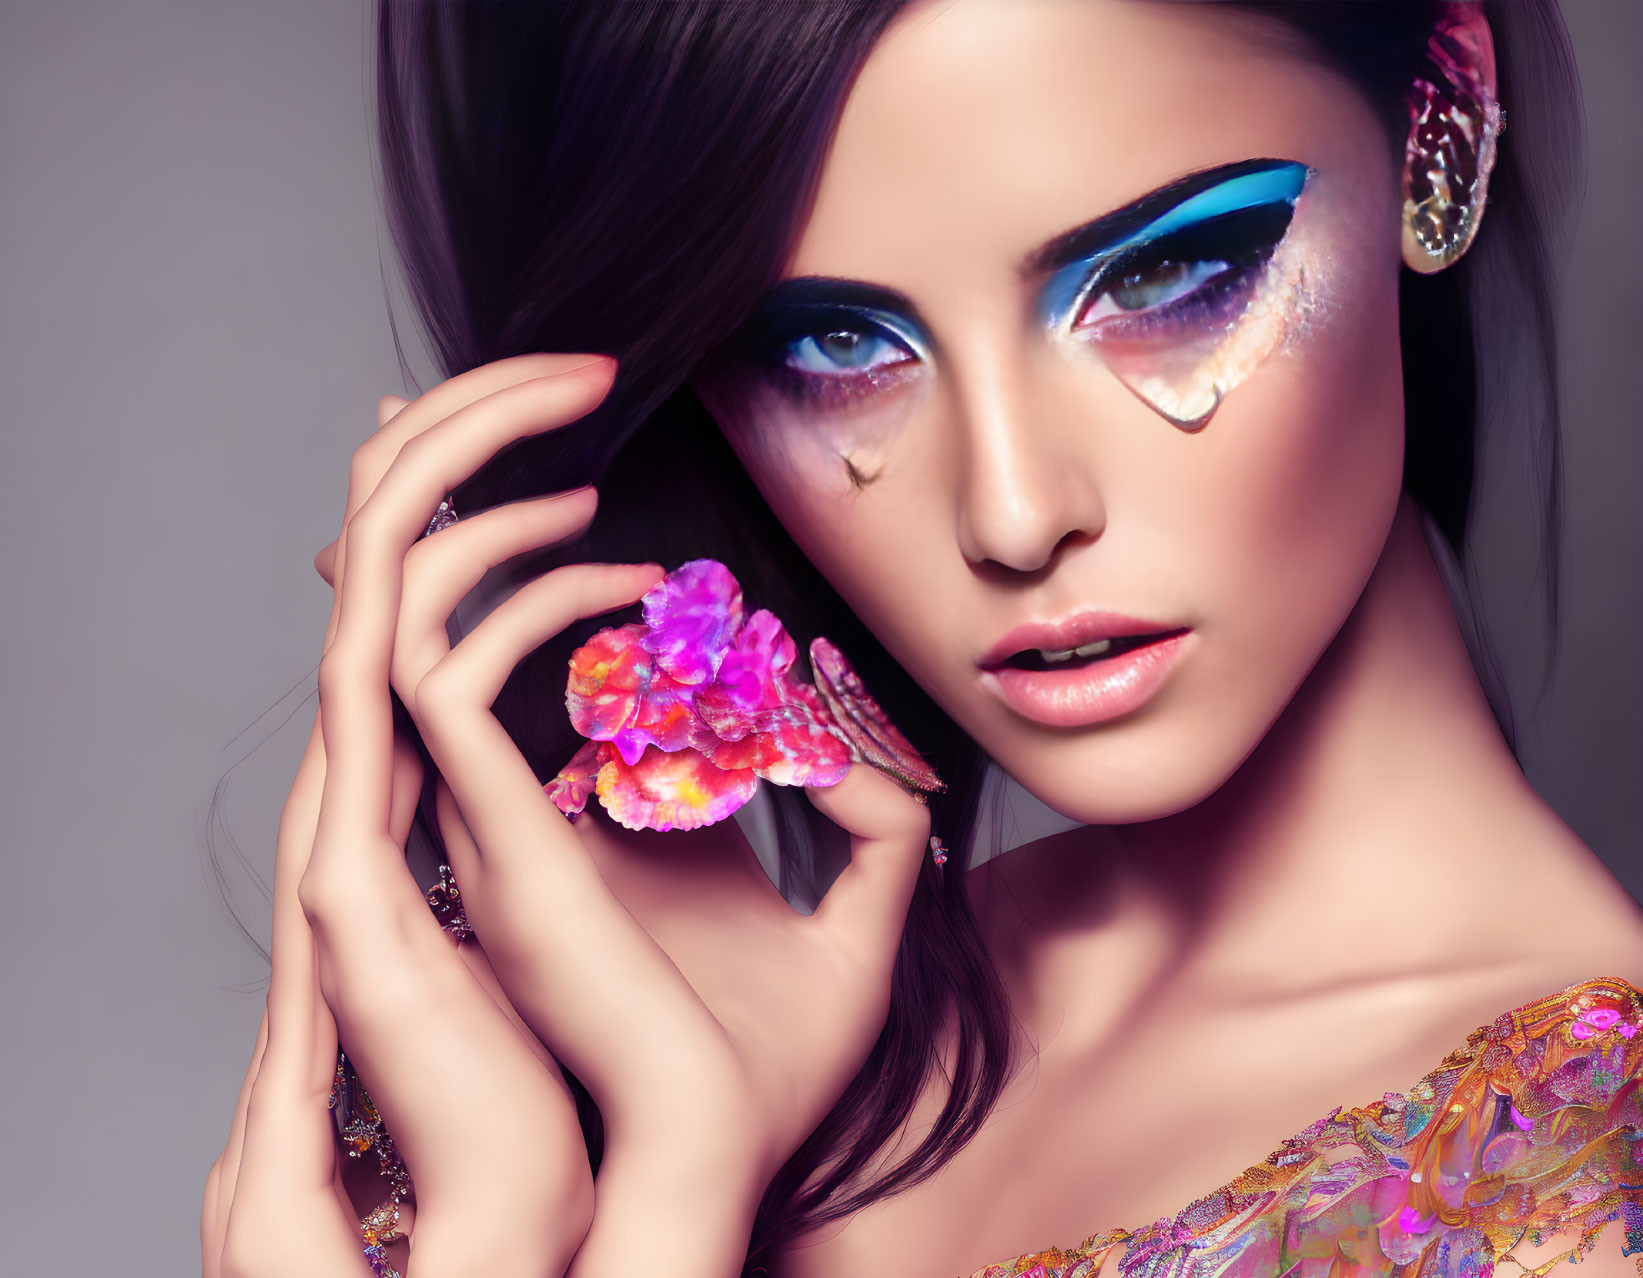 Woman showcasing dramatic blue eye makeup and pink orchid earrings for a bold fashion look